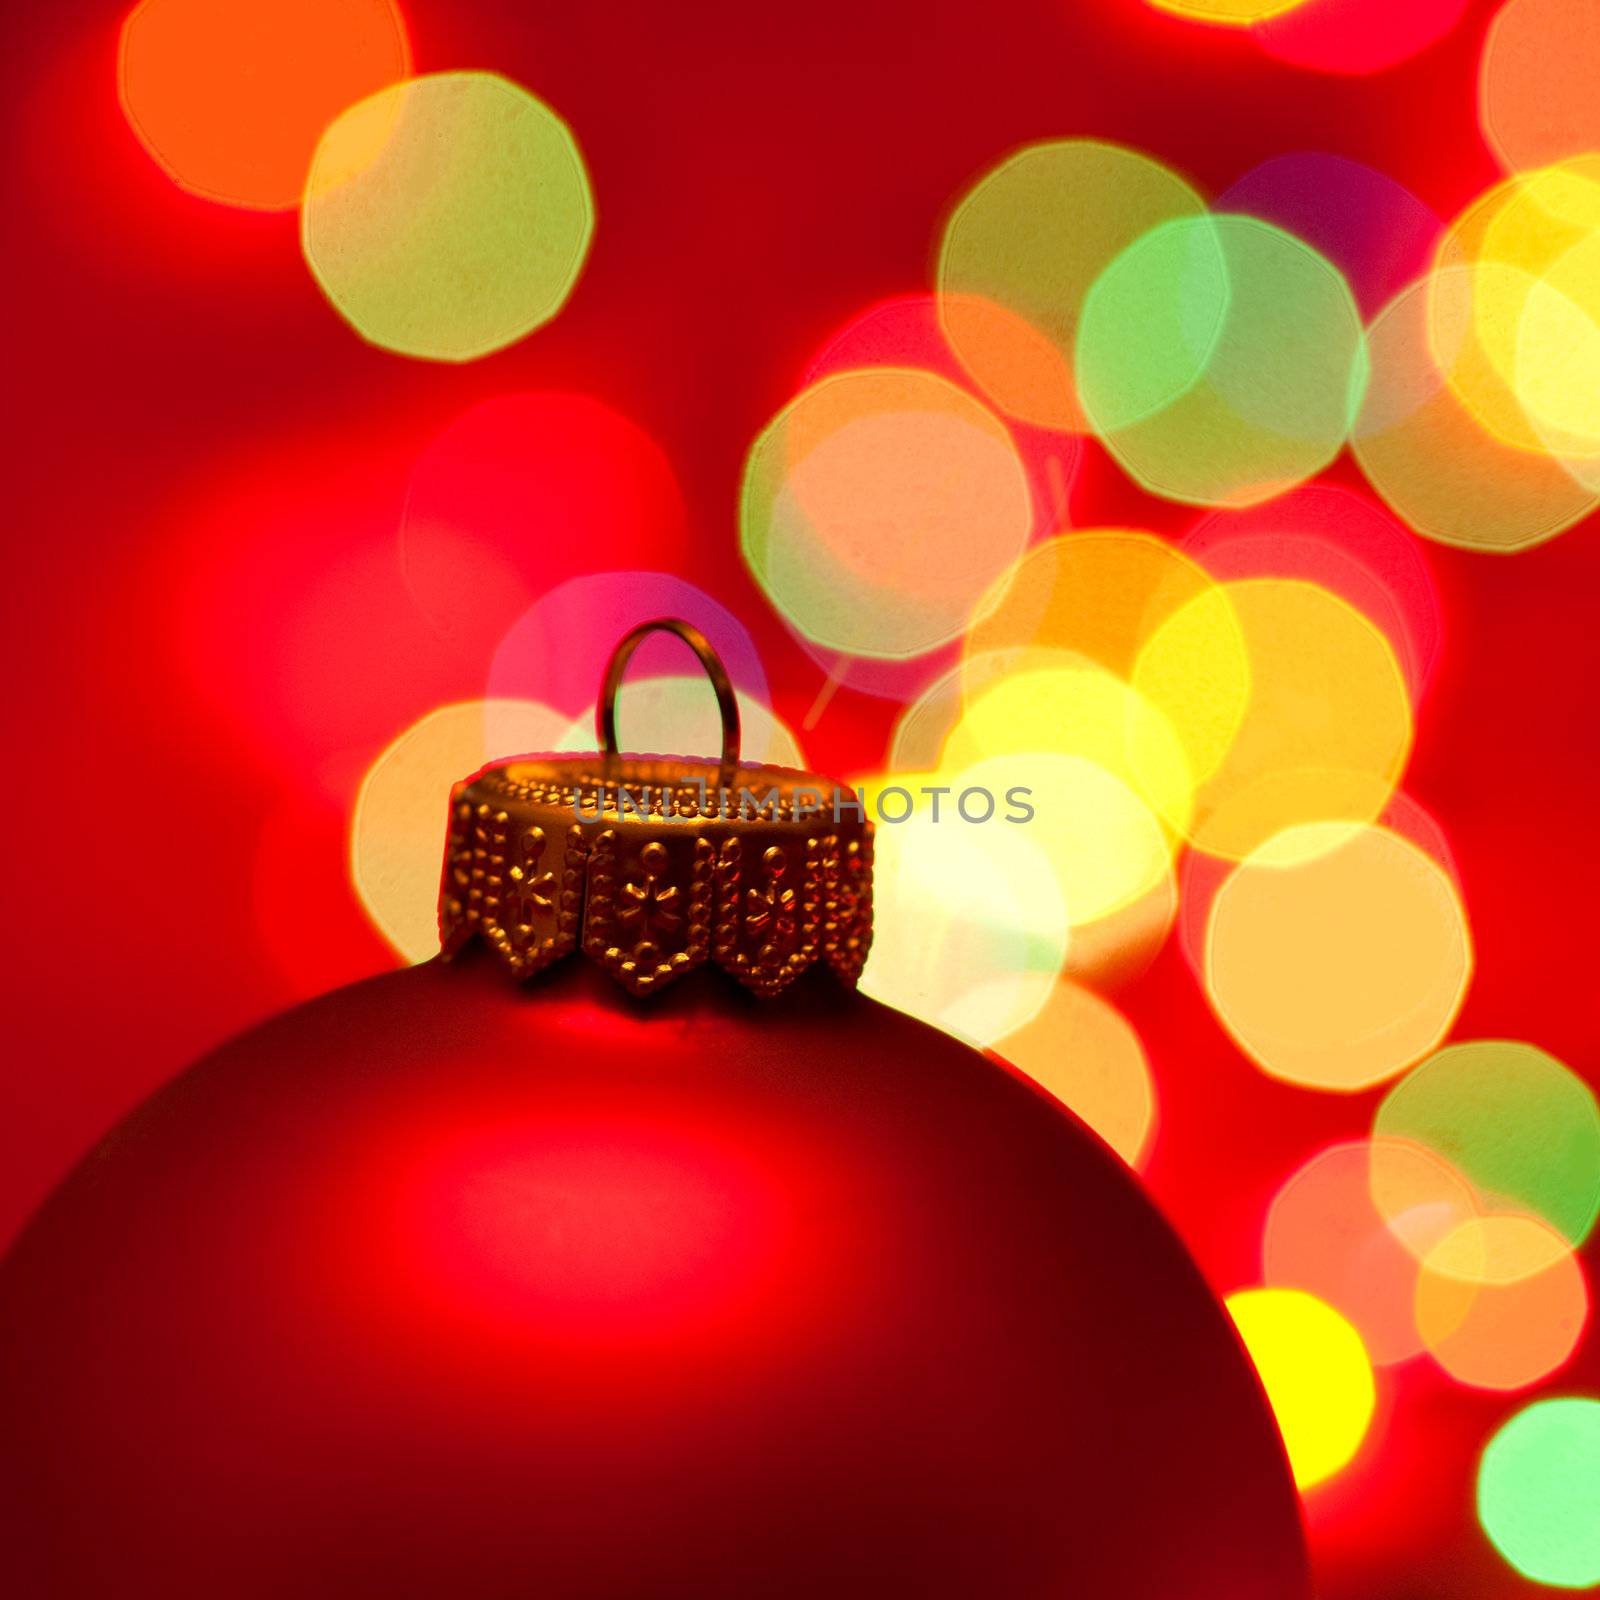 Red Christmas bauble with blured lights in background, very shallow DOF